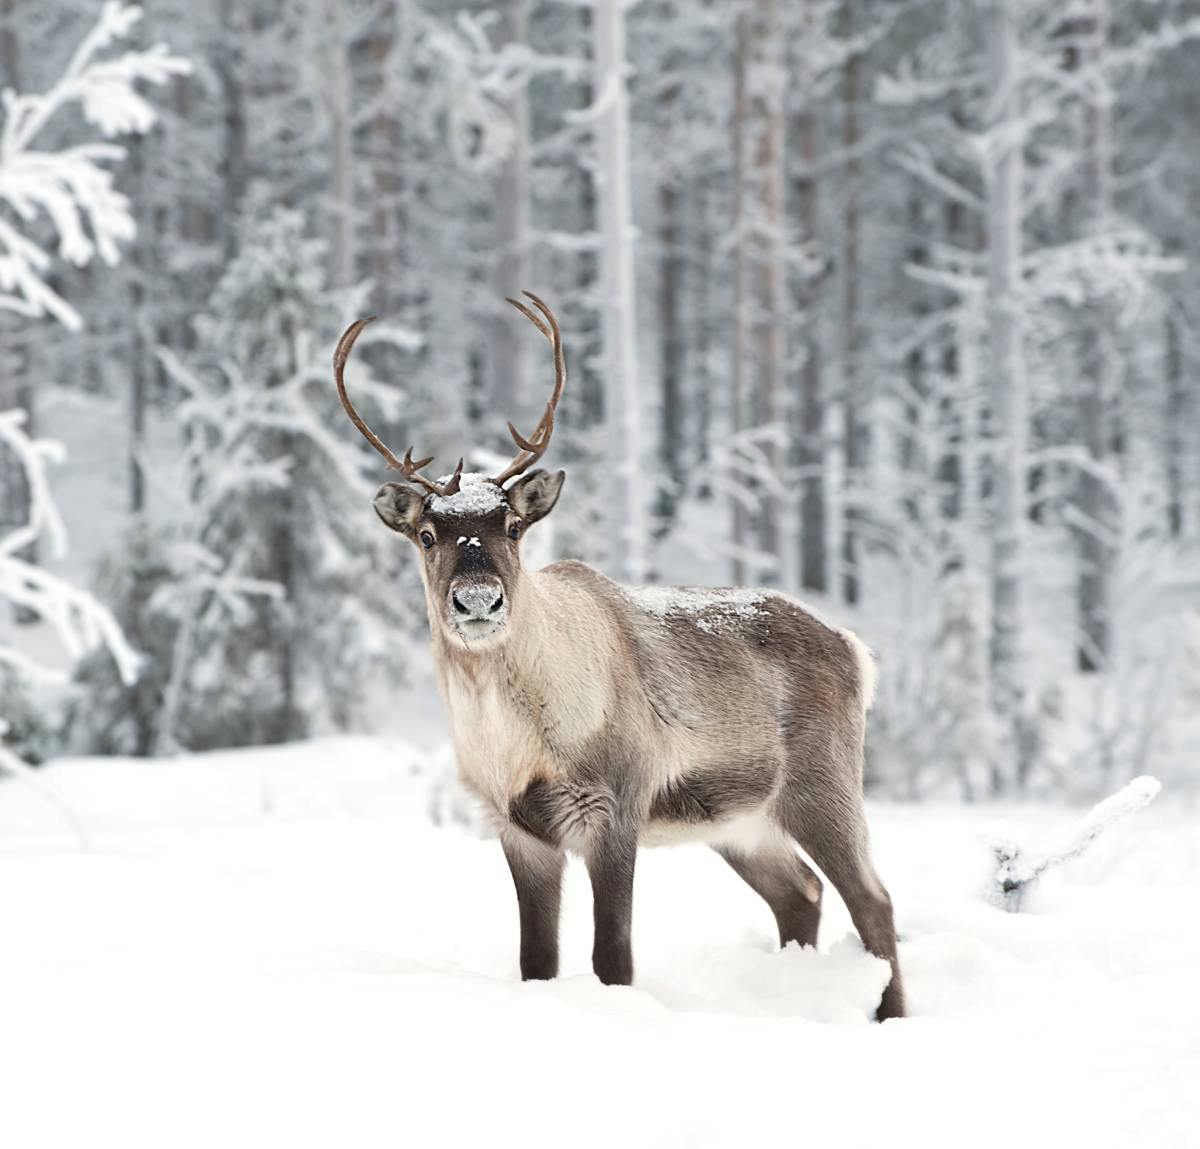 Reindeer: large, majestic herbivores surviving the Arctic Tundra | One Earth